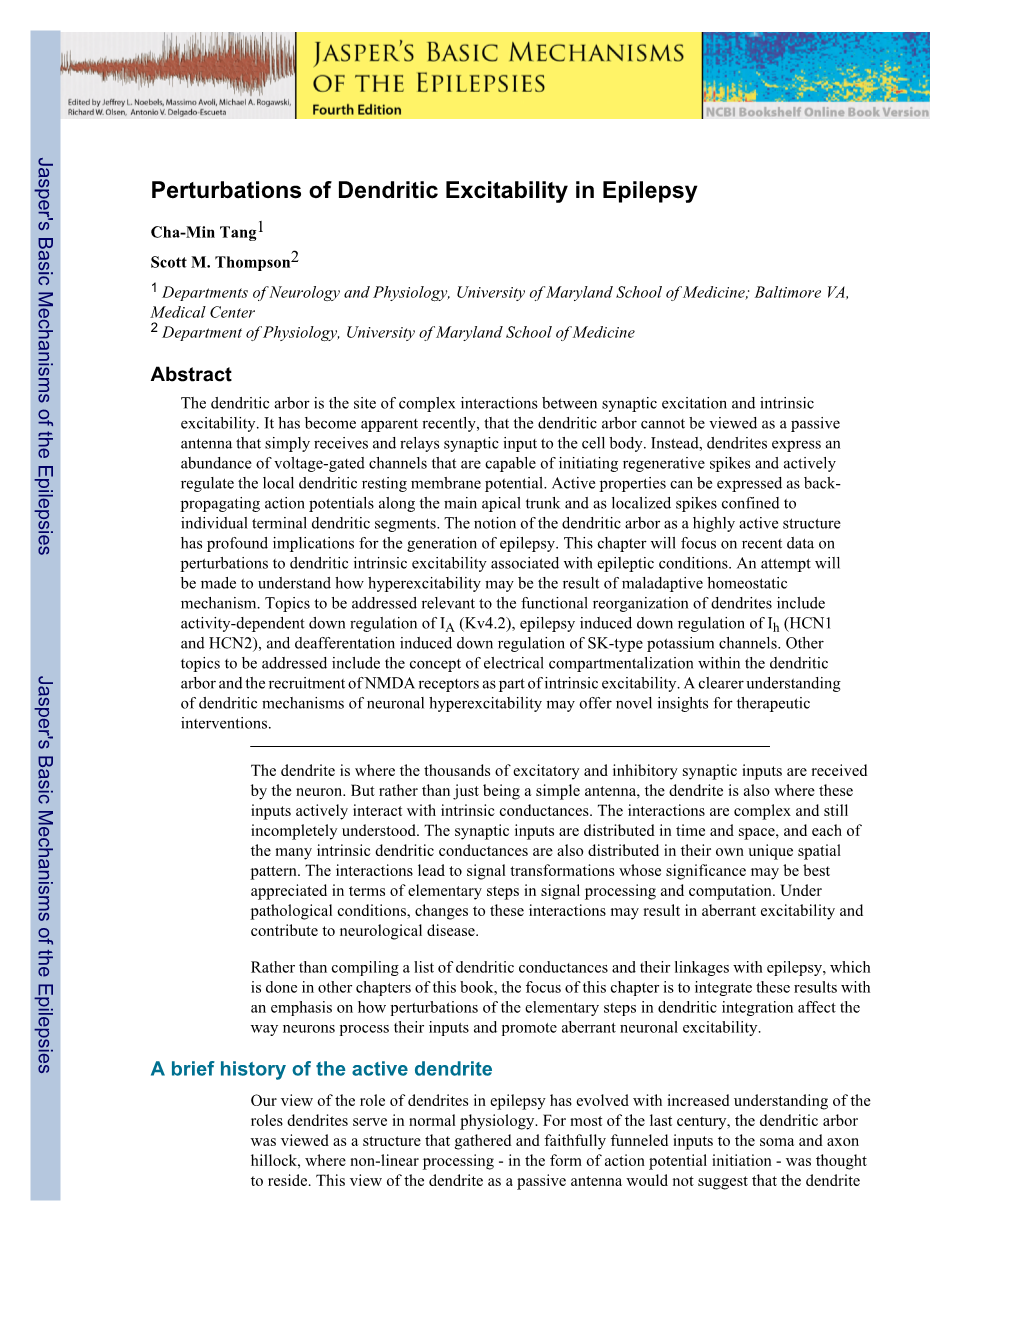 Perturbations of Dendritic Excitability in Epilepsy